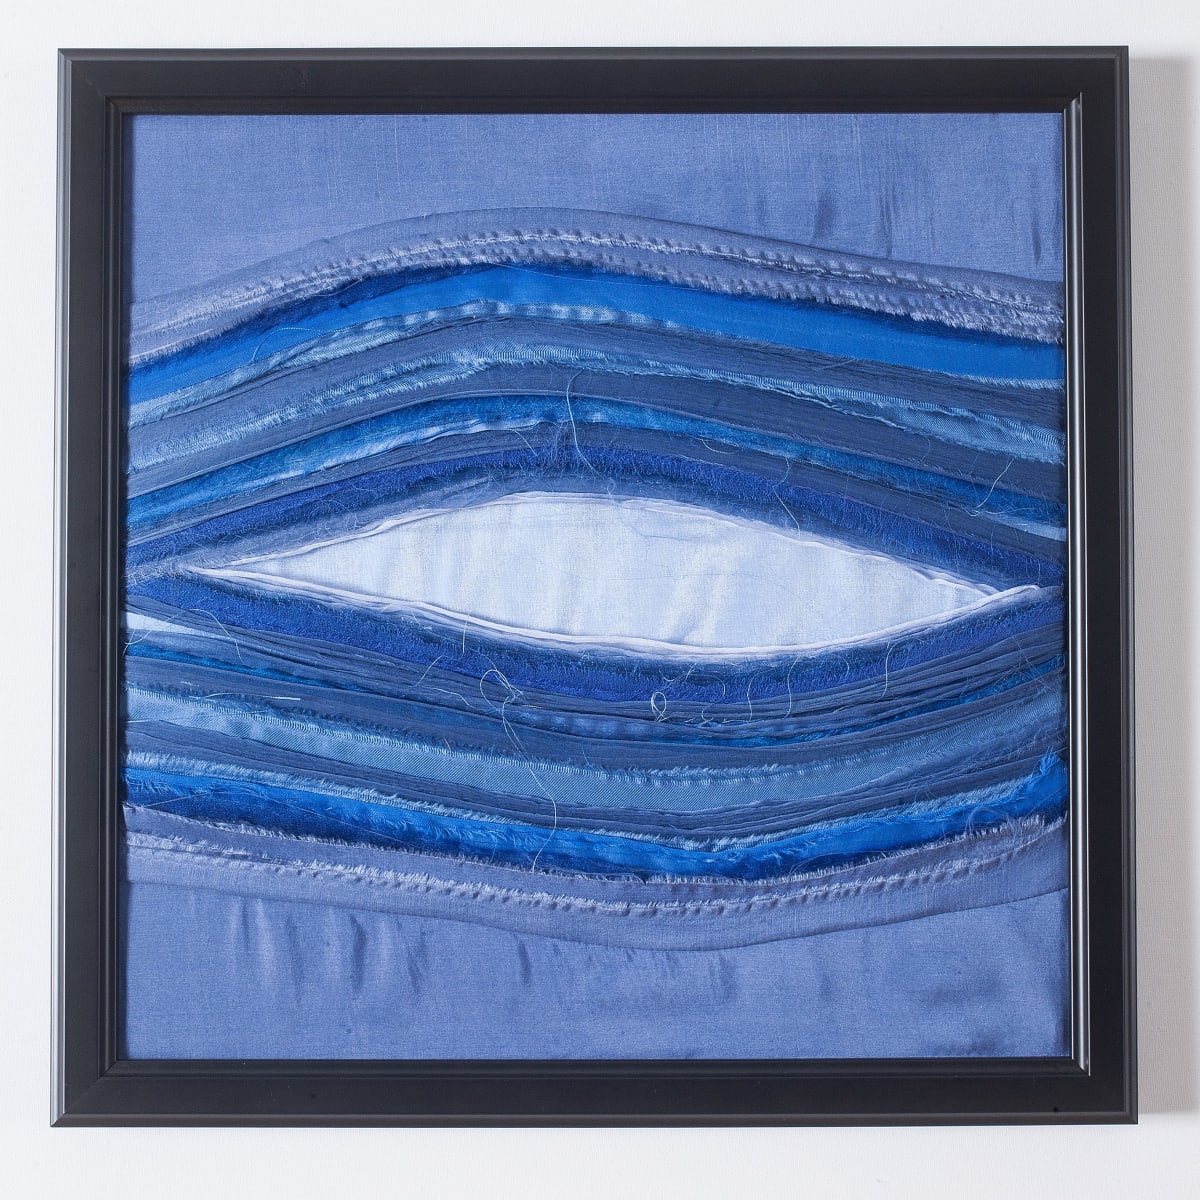 Synesthesia #11 Blue by Lesley Turner  Image: Lesley Turner, 'Synesthesia #11 Blue', 2017, 13"x13"x0.5". Silk and nylon fabrics, cotton and polyester threads. Working monochromatically I focused on expressing the color’s radiating energy through line and value.  Photo: Tony Bounsall Photo-Design